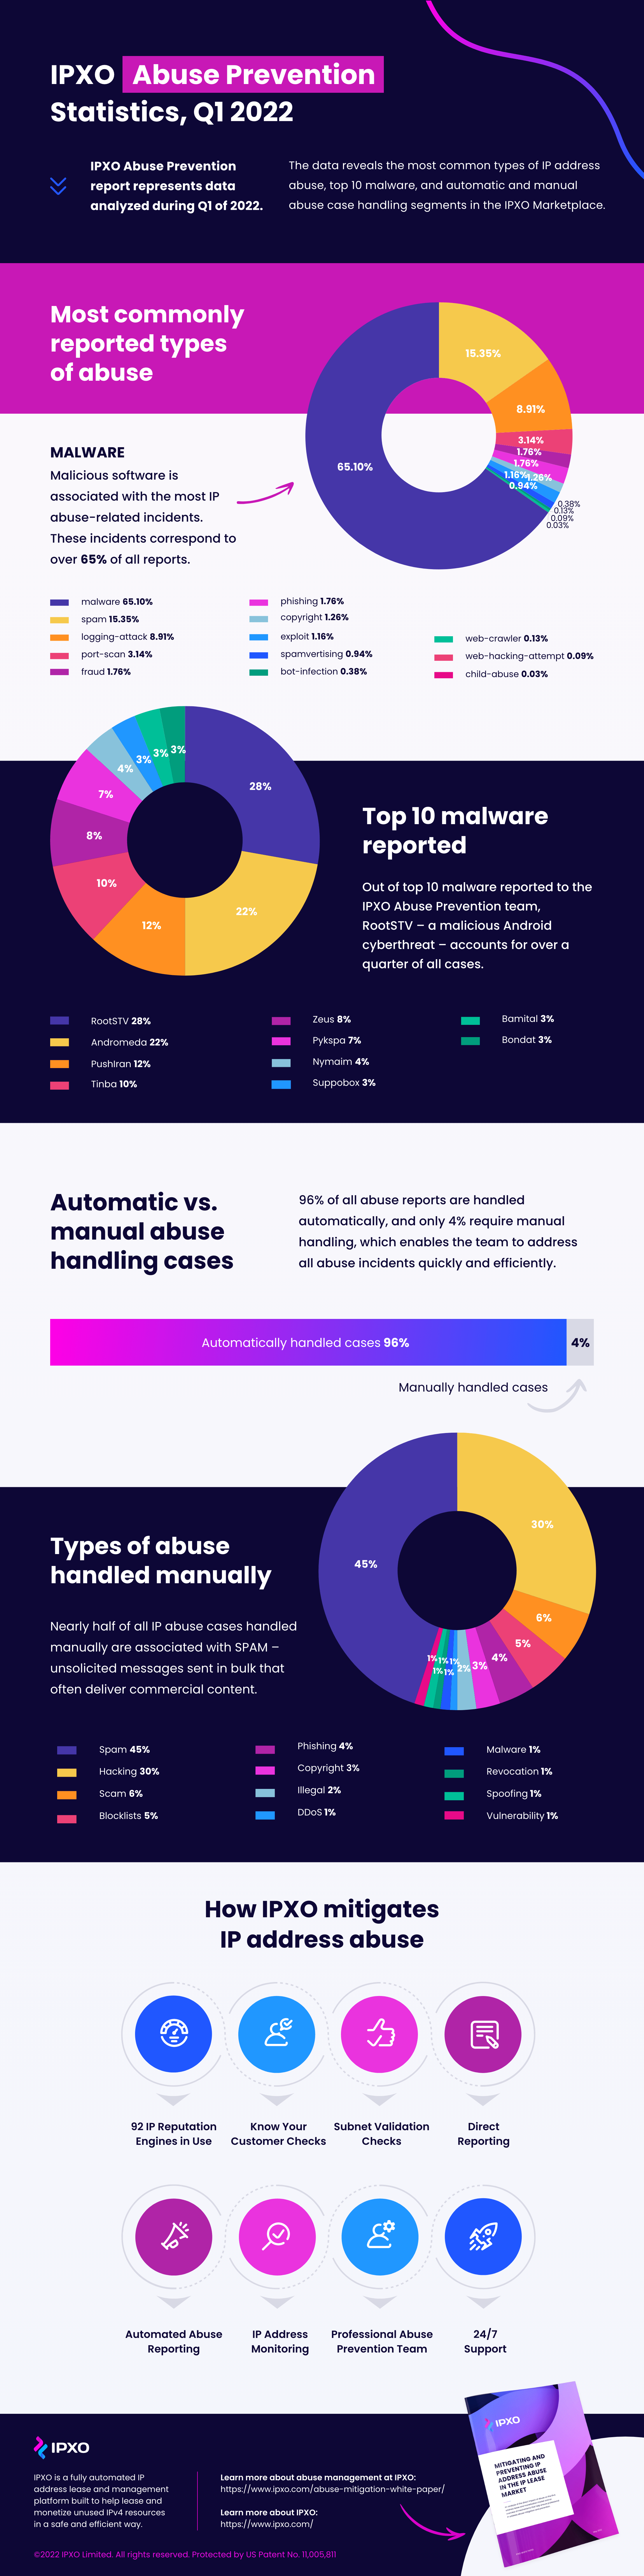 Infographic showing IPXO abuse prevention statistics with pie charts.